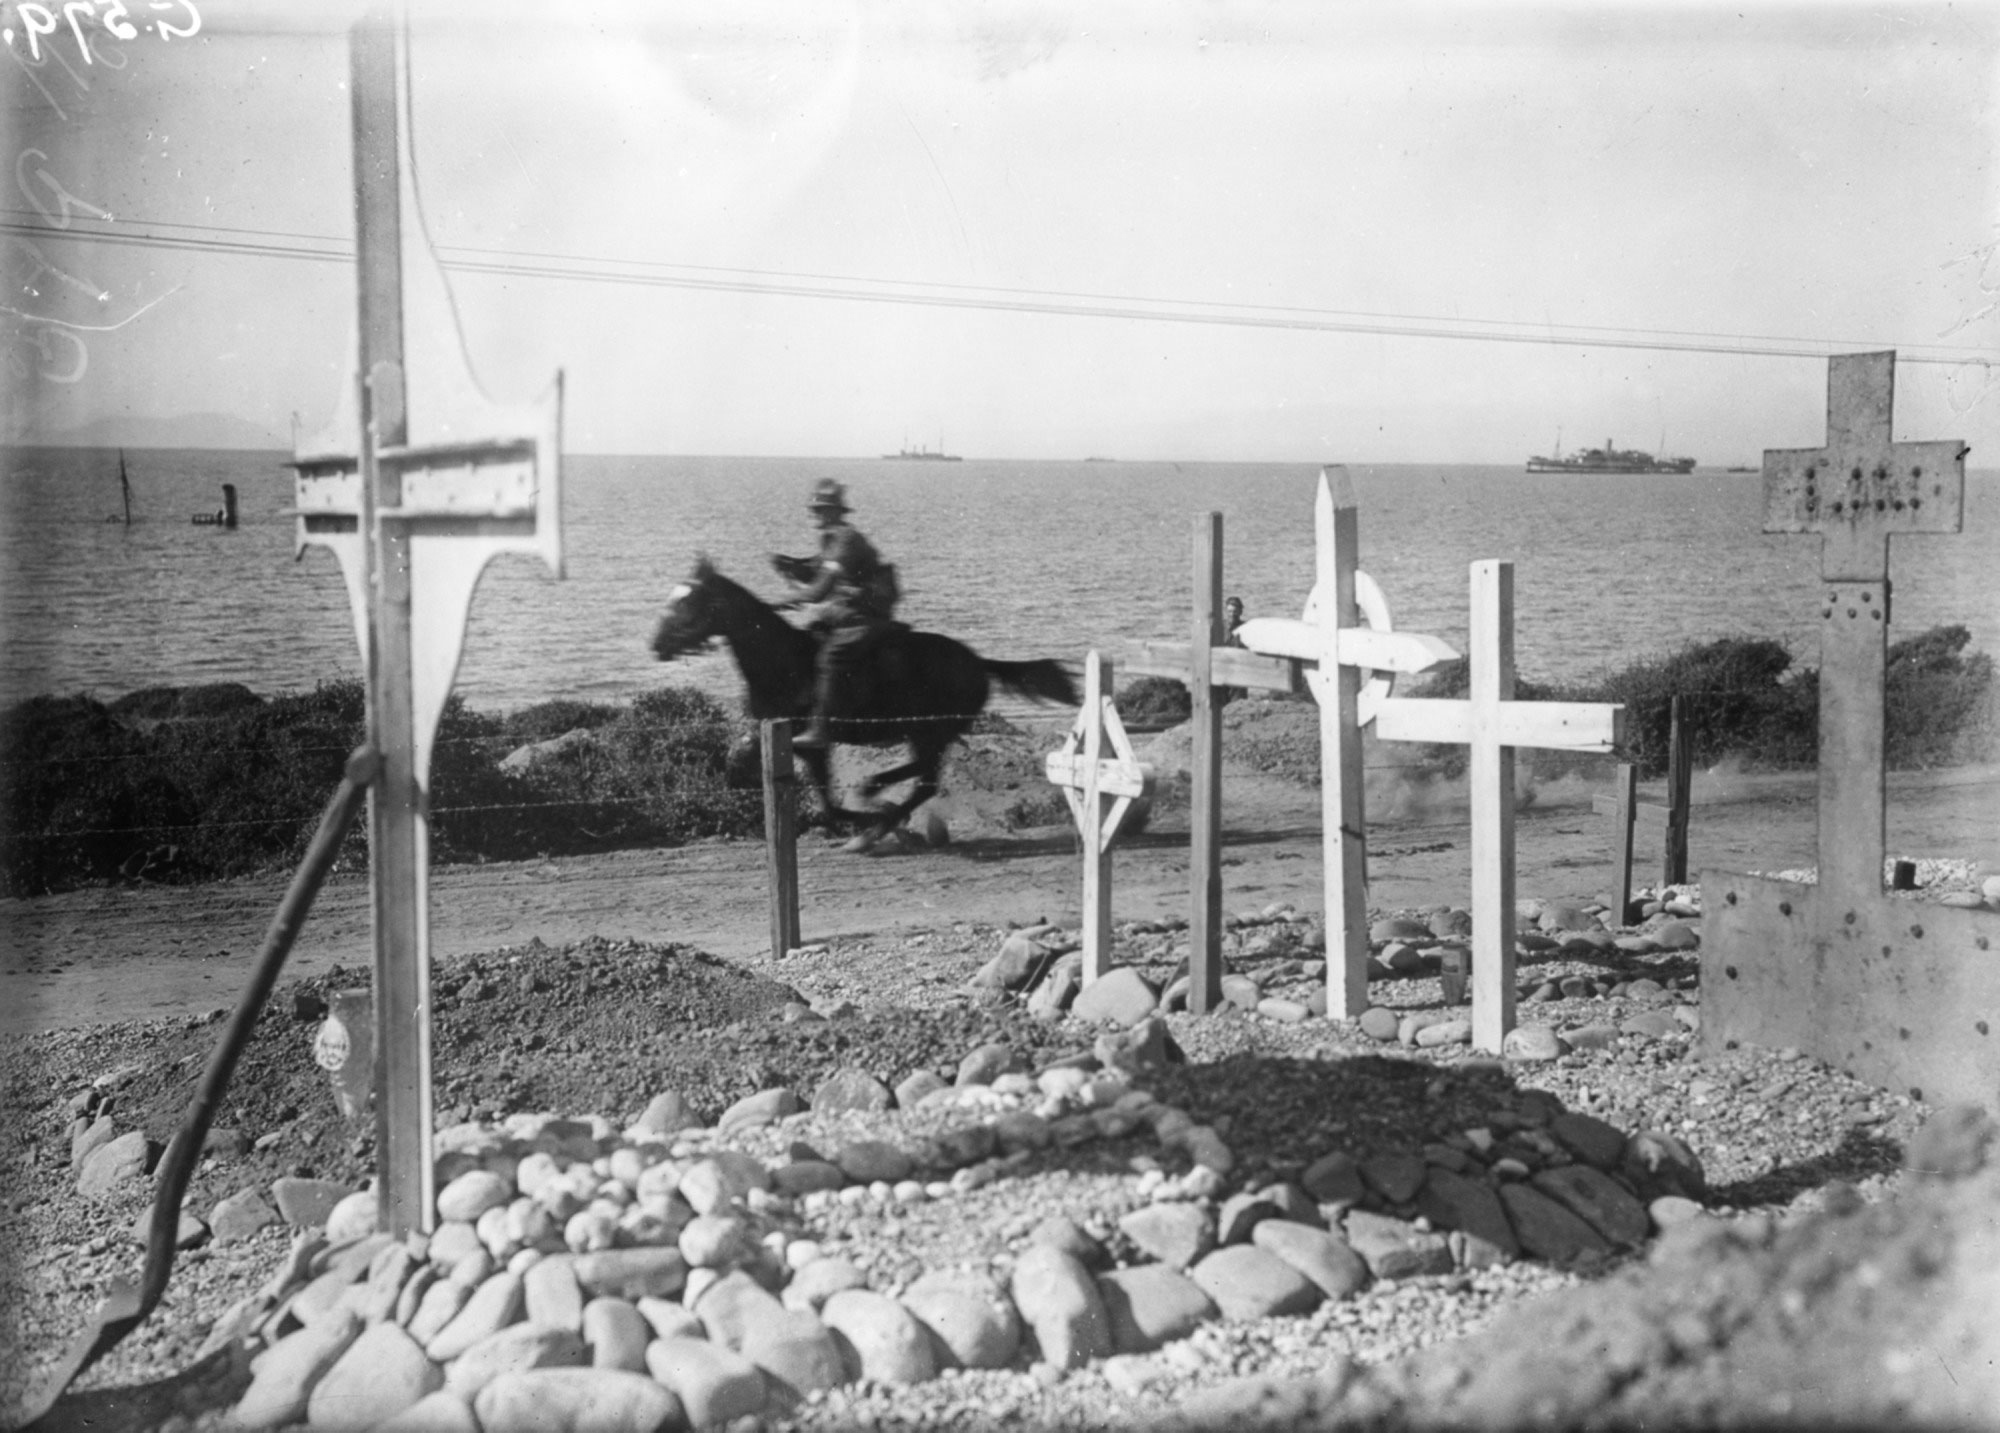 A despatch rider (messenger) galloping from Suvla Bay to Anzac Cove to avoid being sniped at, Gallipoli, 1915.